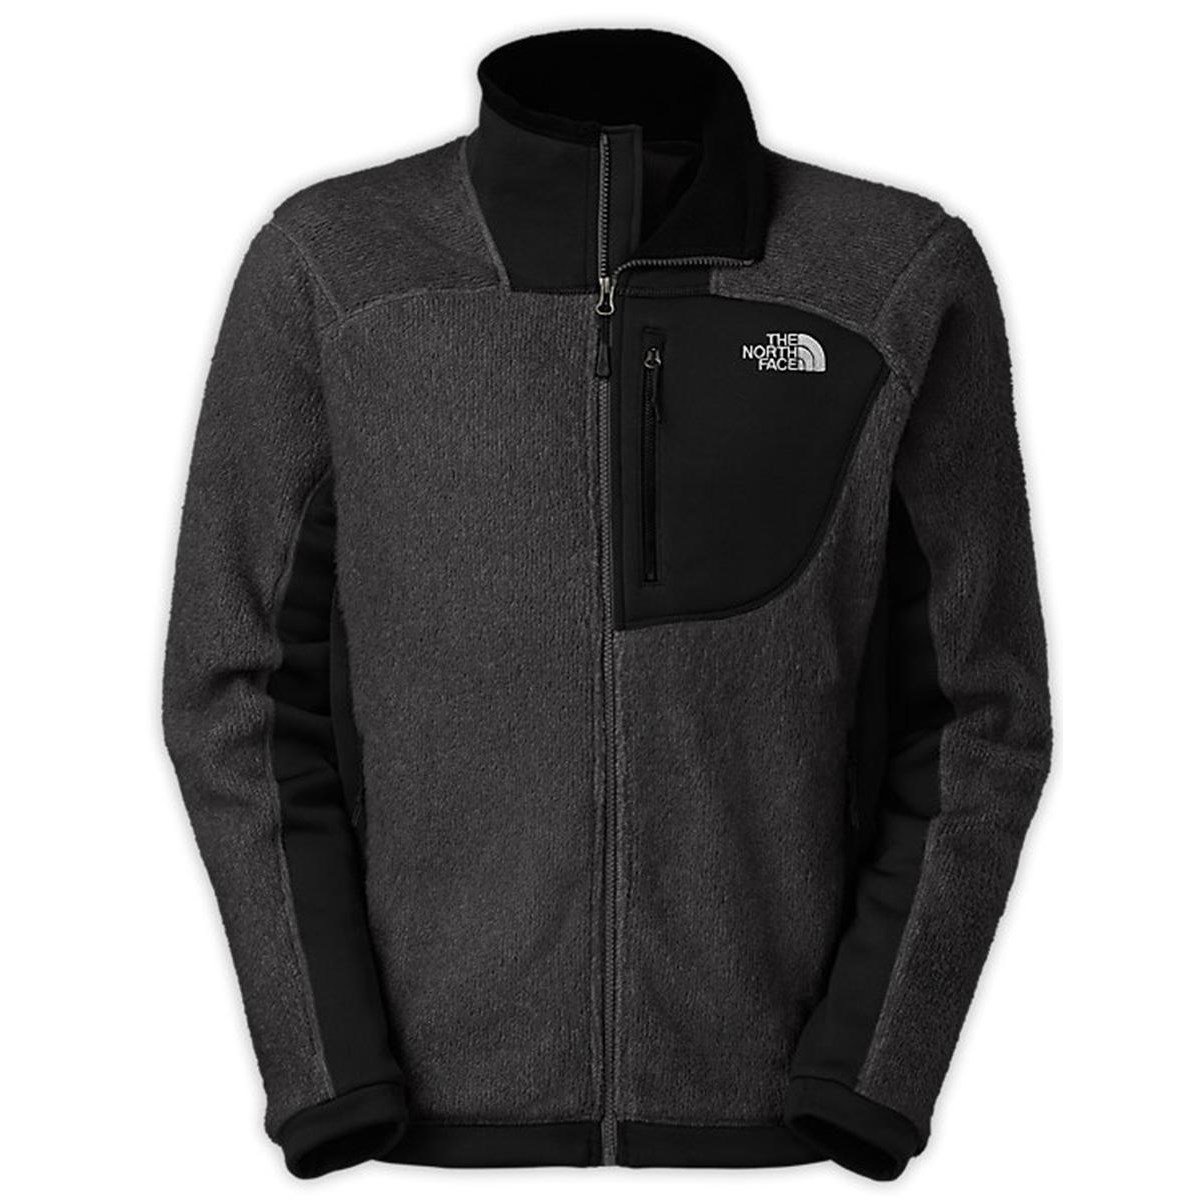 The North Face Grizzly Jacket | evo